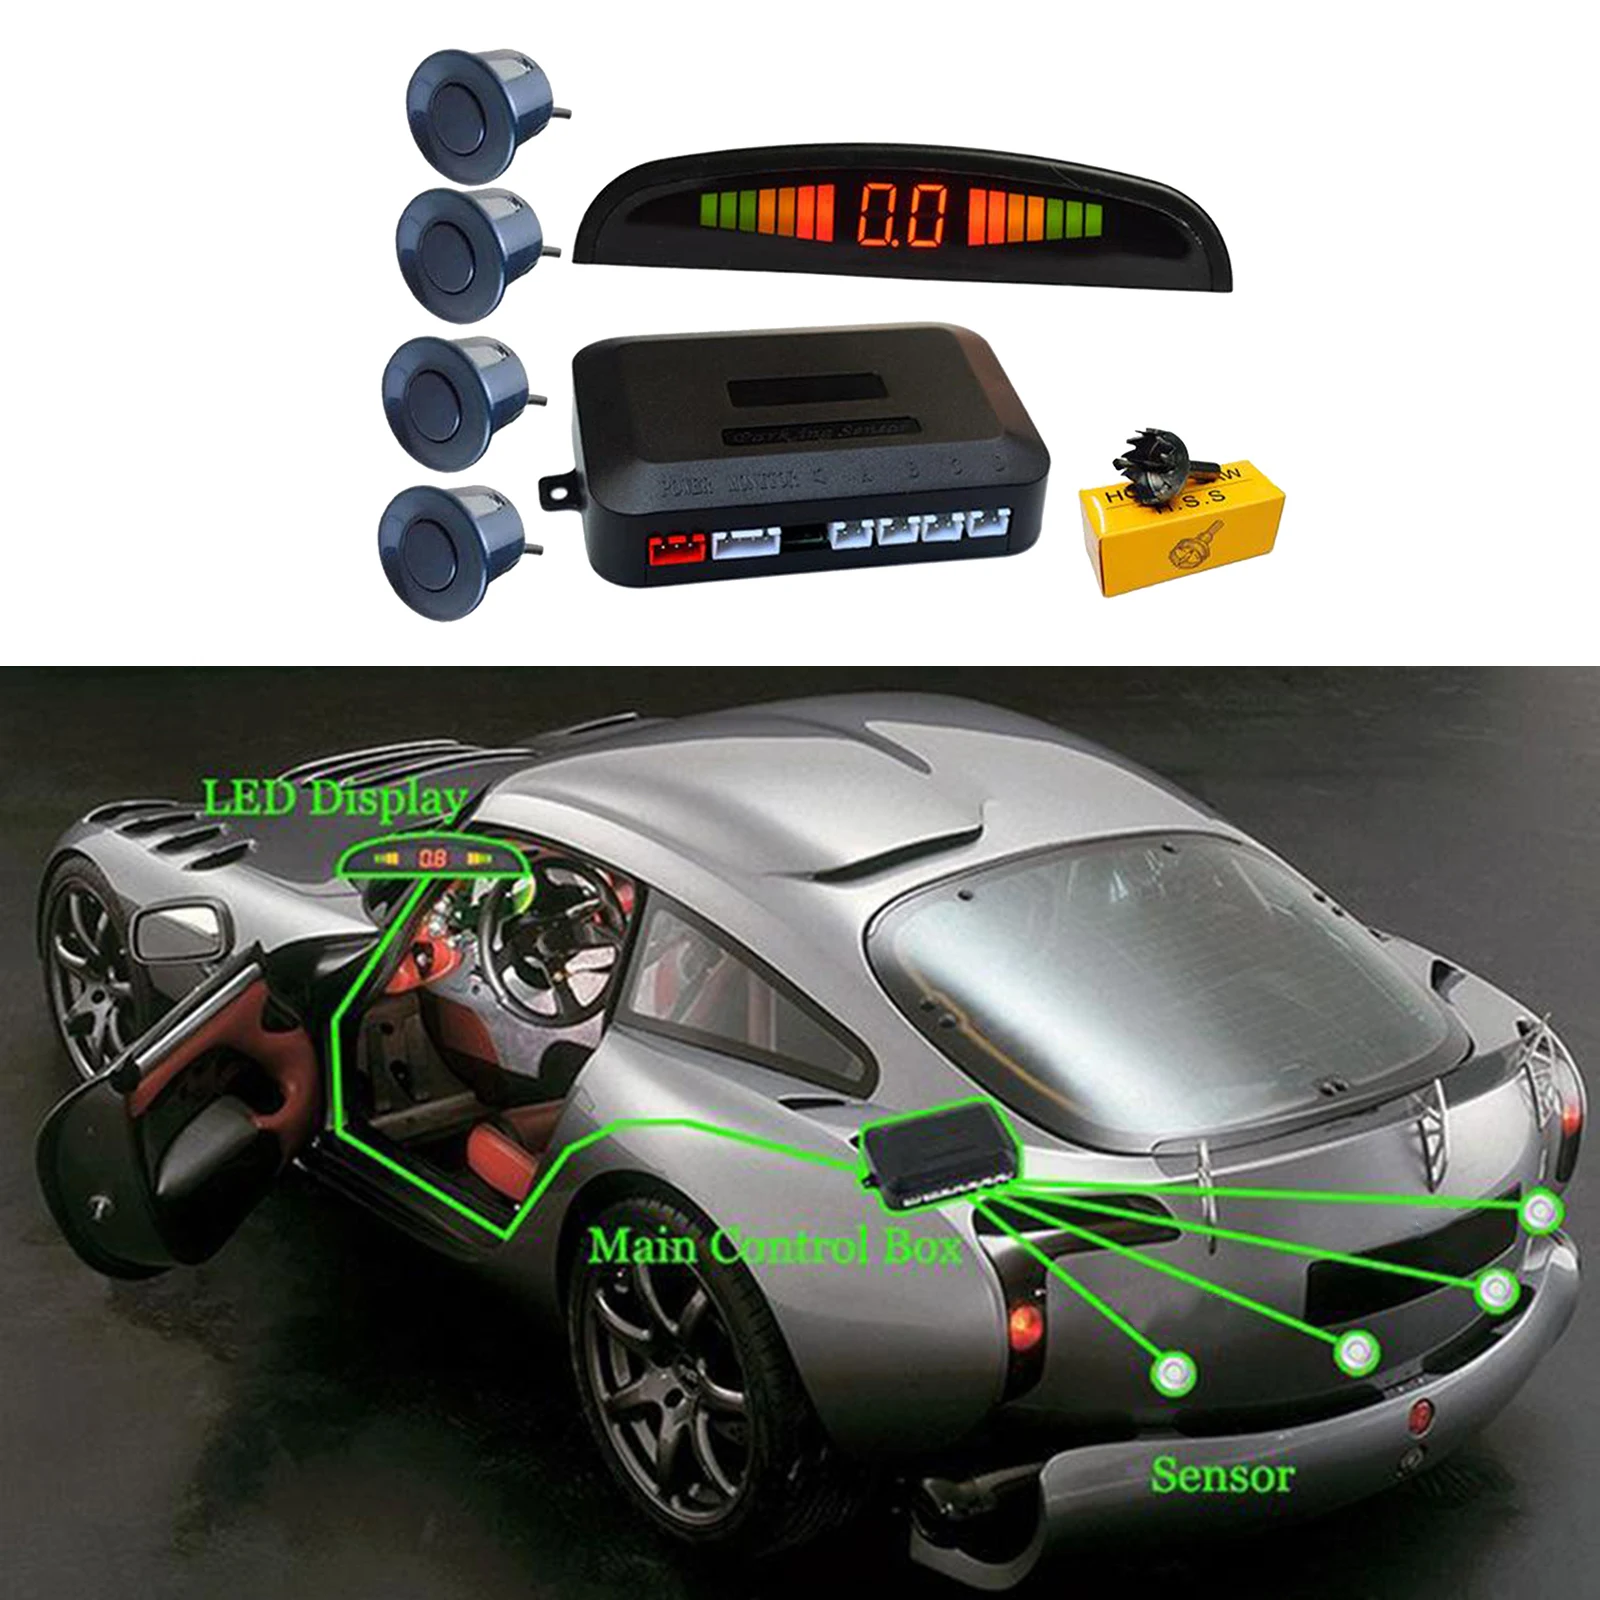 Car Auto Vehicle Reverse Backup  System with 4 Parking Sensors Distance Detection, LED Distance Display, Buzzer Warning